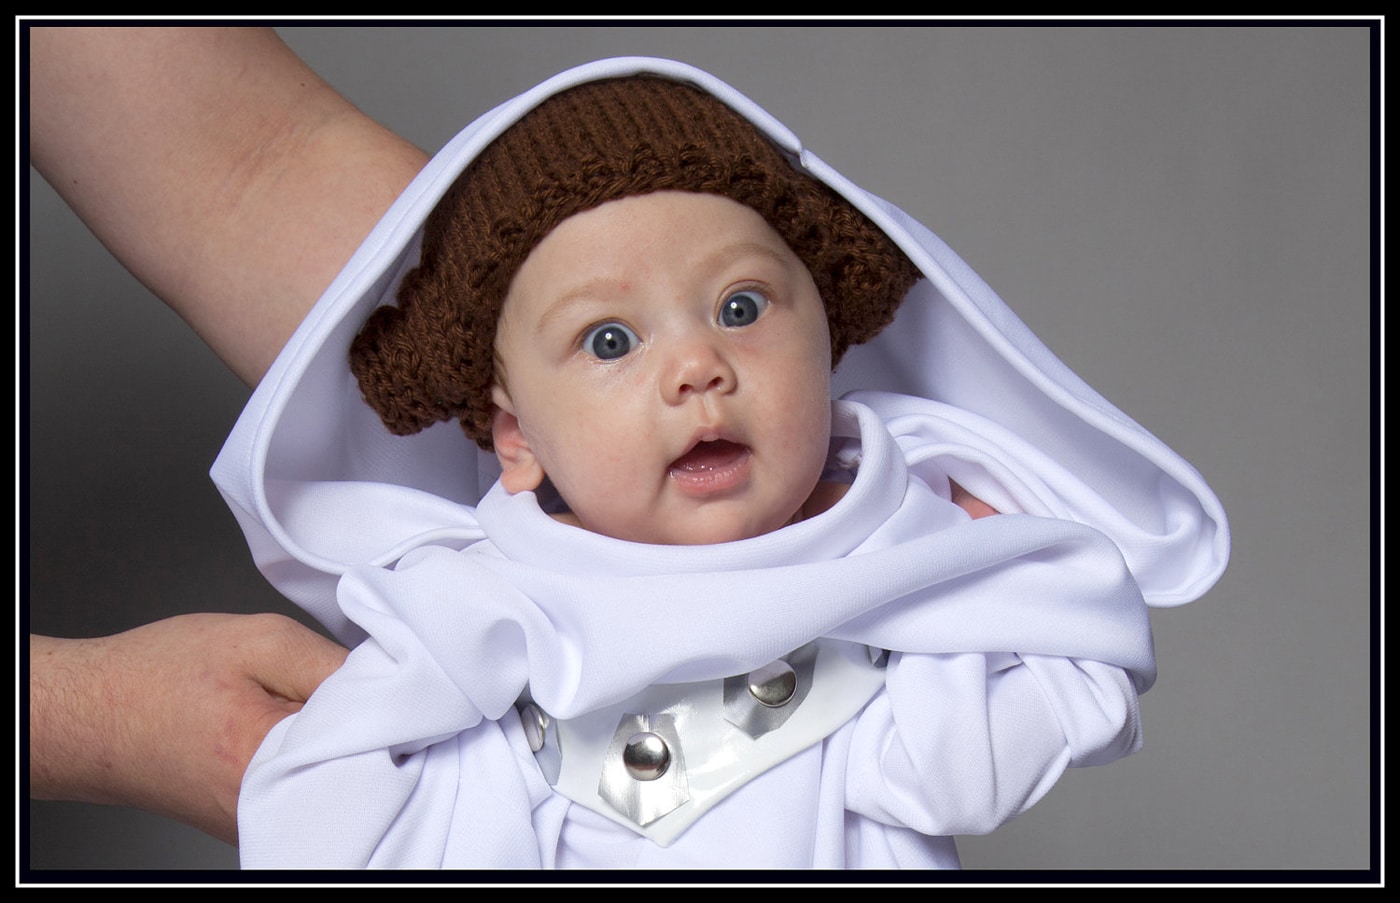 Princess Leia Baby Robe & Hat: Let Your Baby Girl Go Geek